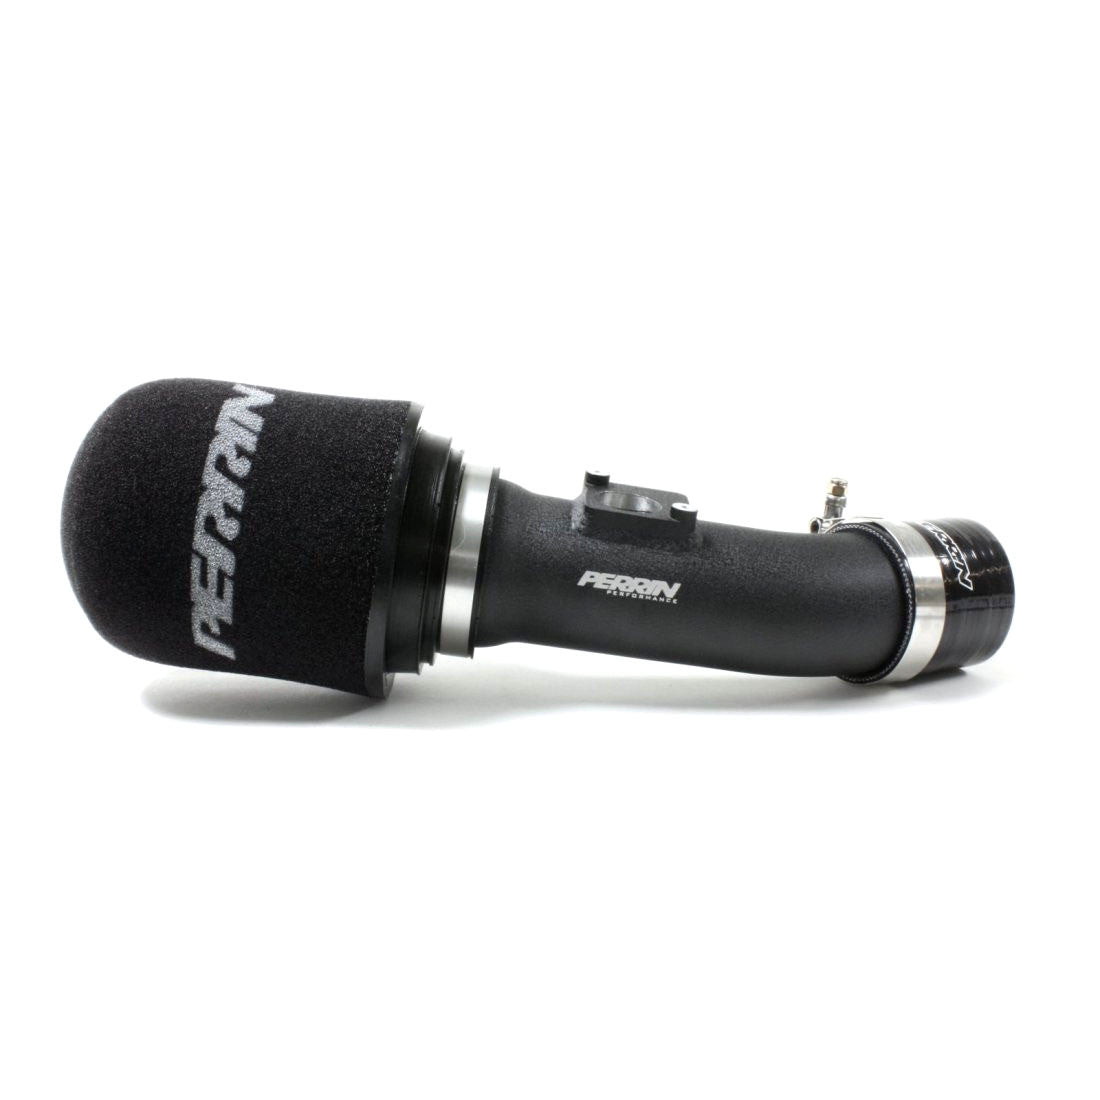 Perrin Short Ram Intake for 2002-2007 WRX and STI